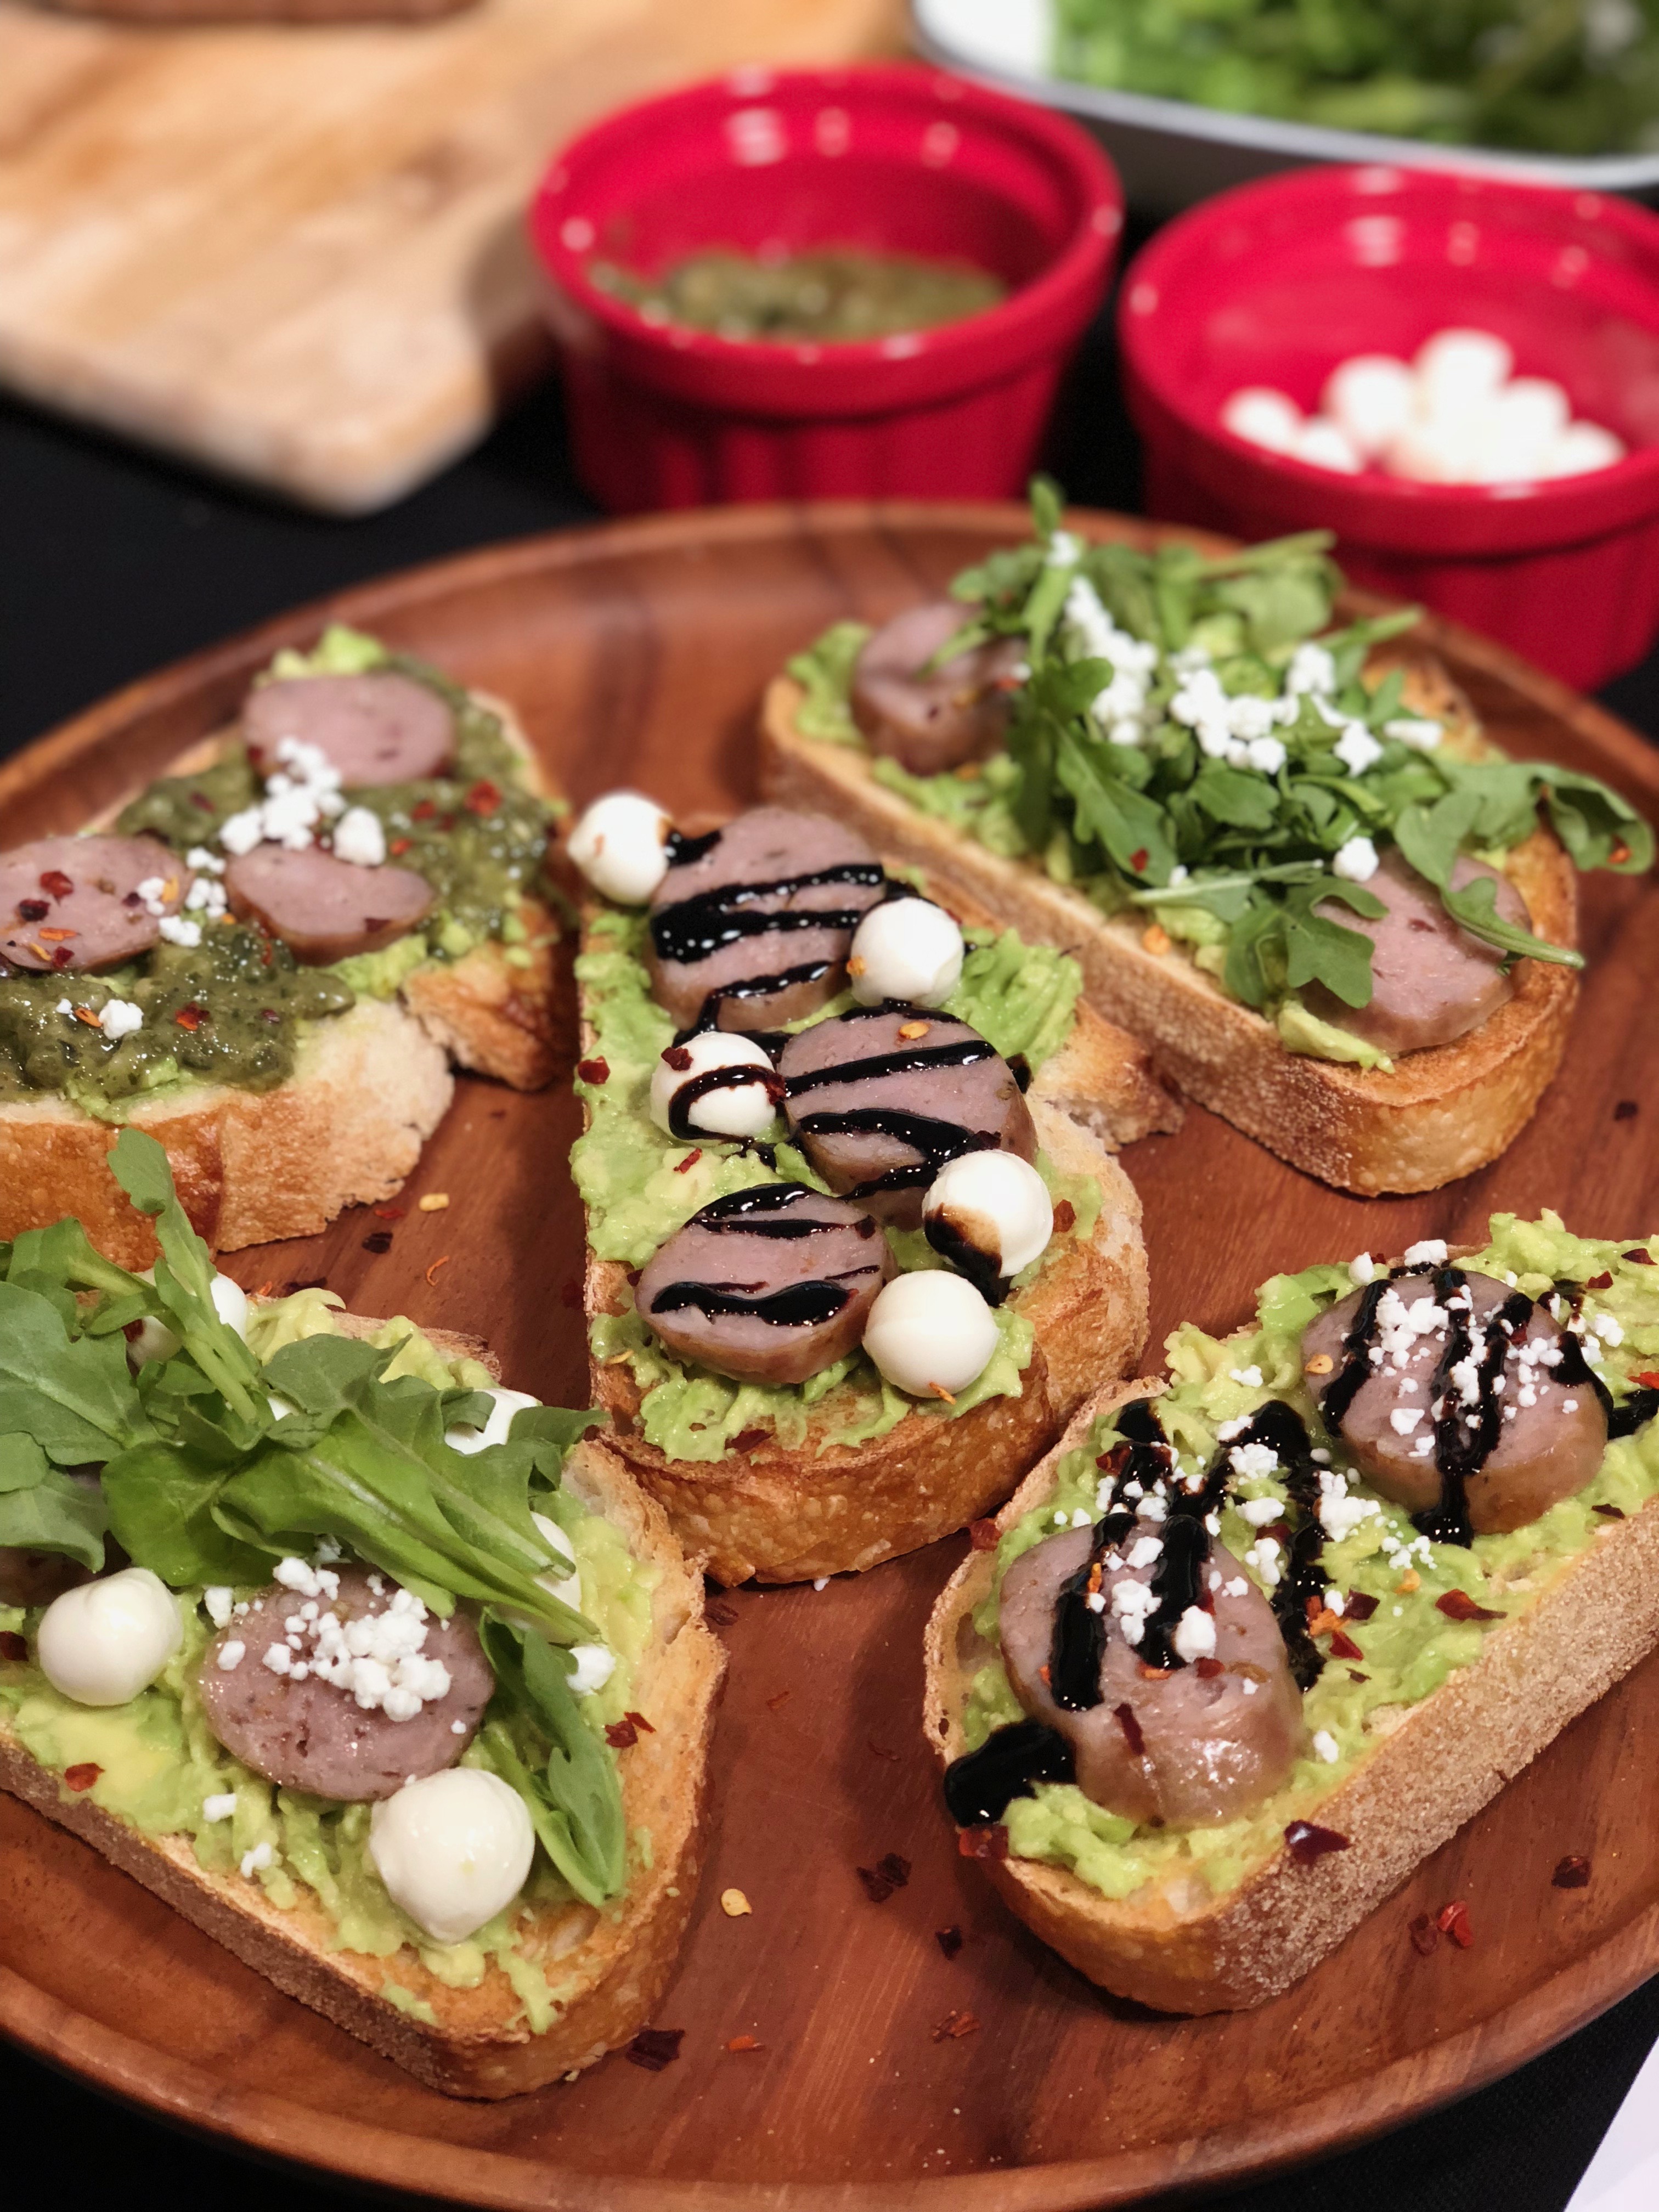 Five slices of customized avocado toast topped with Premio sausage